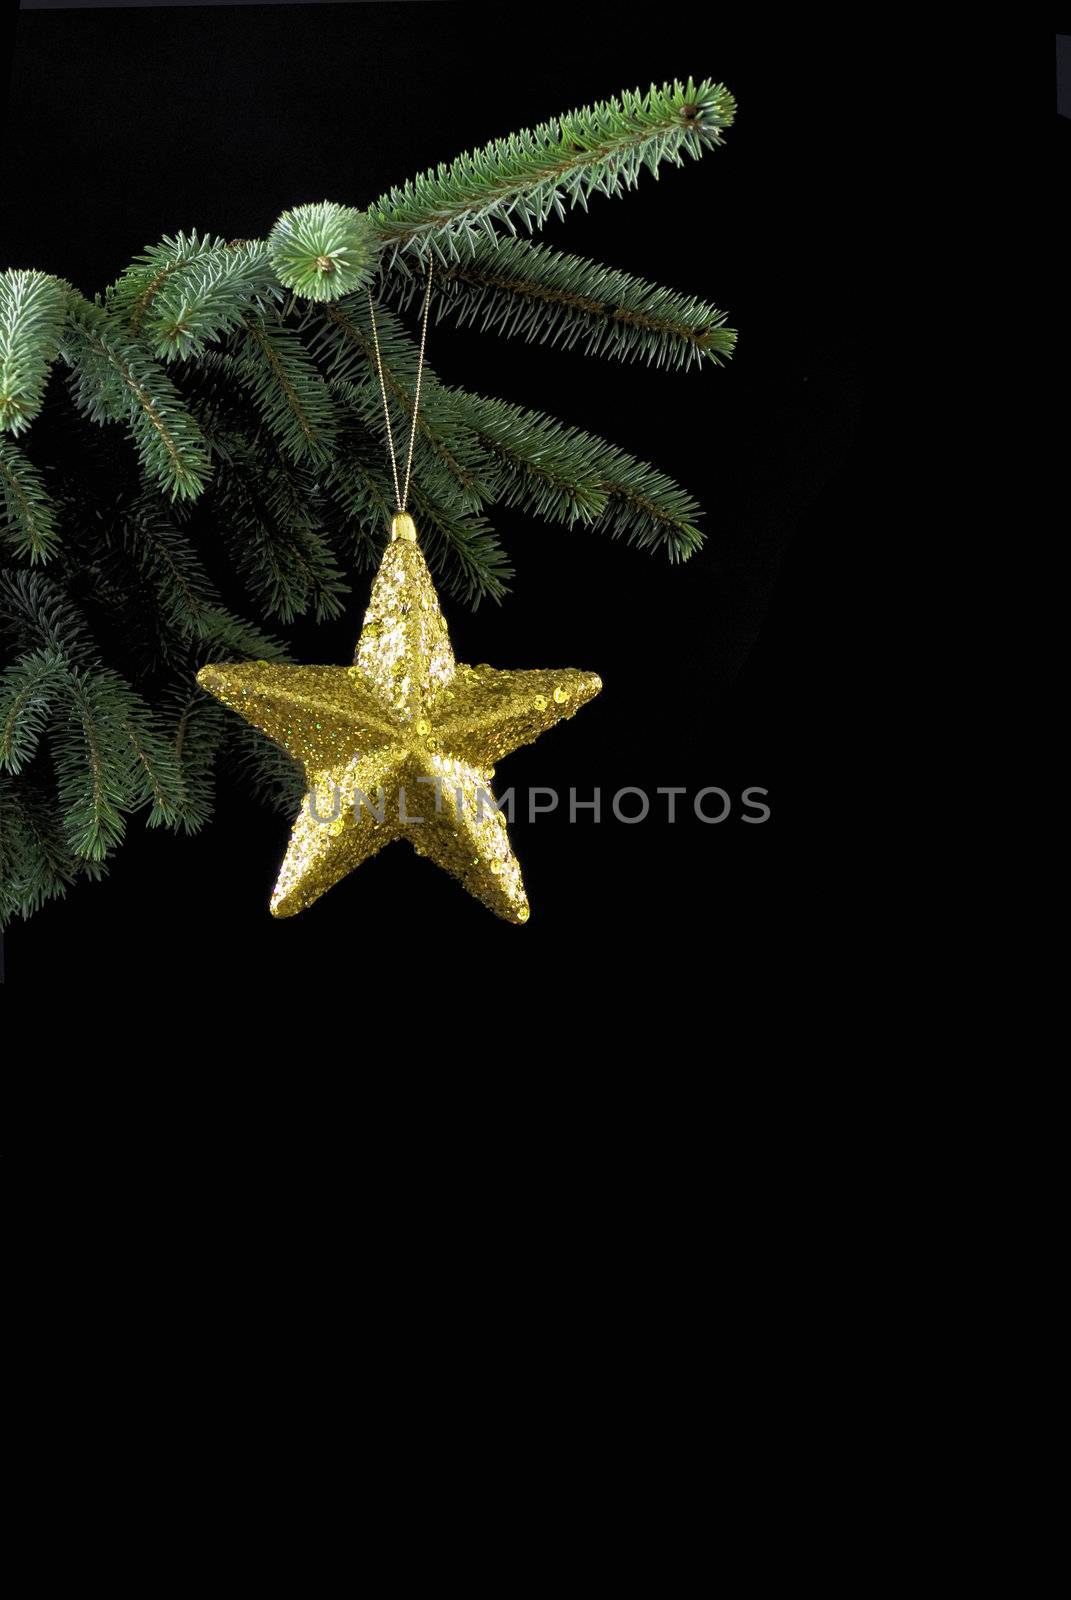 Gold star on spruce branch by caldix